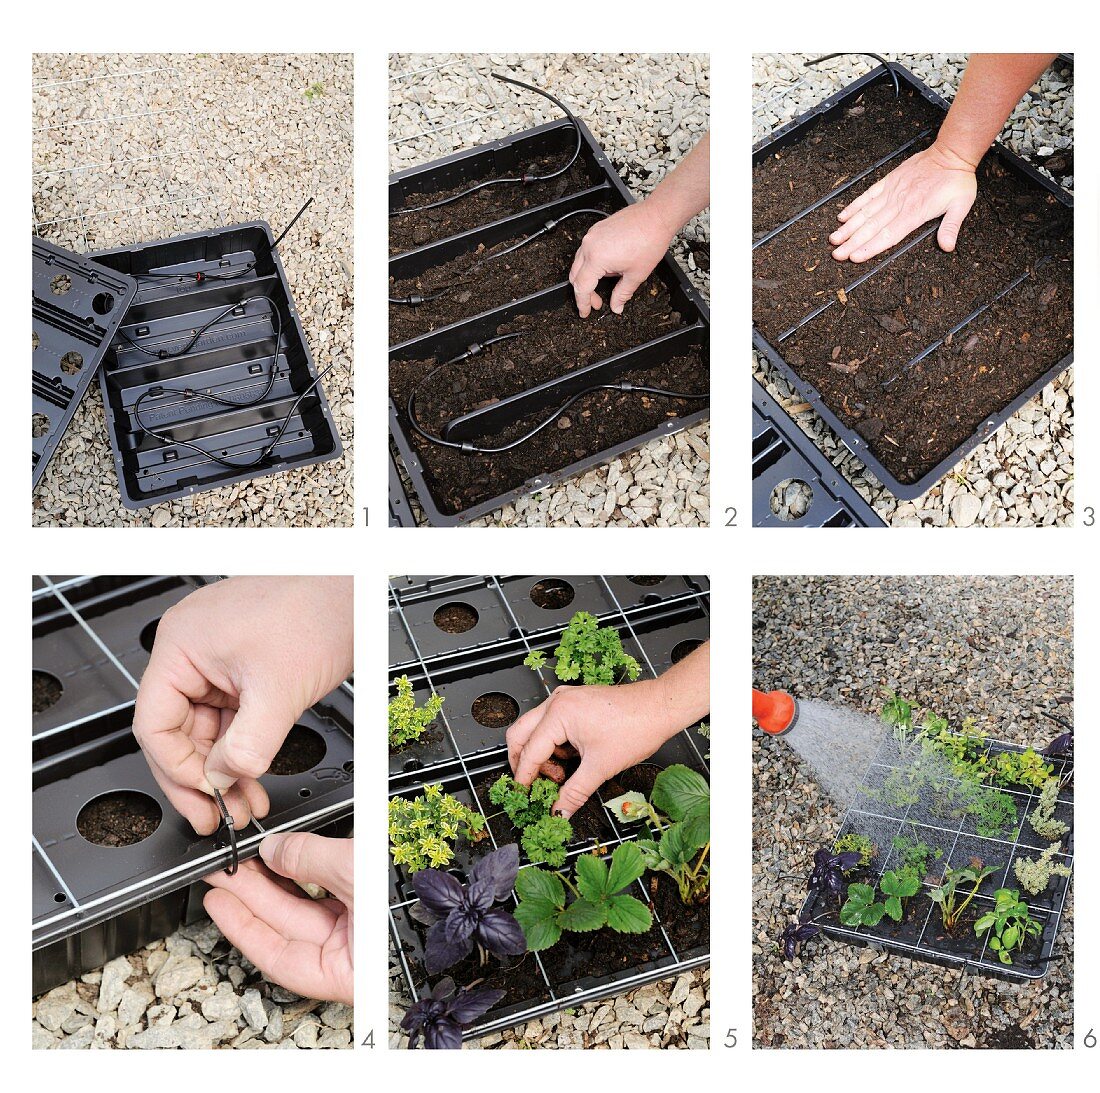 Yard work - planting a variety of plants in plastic containers